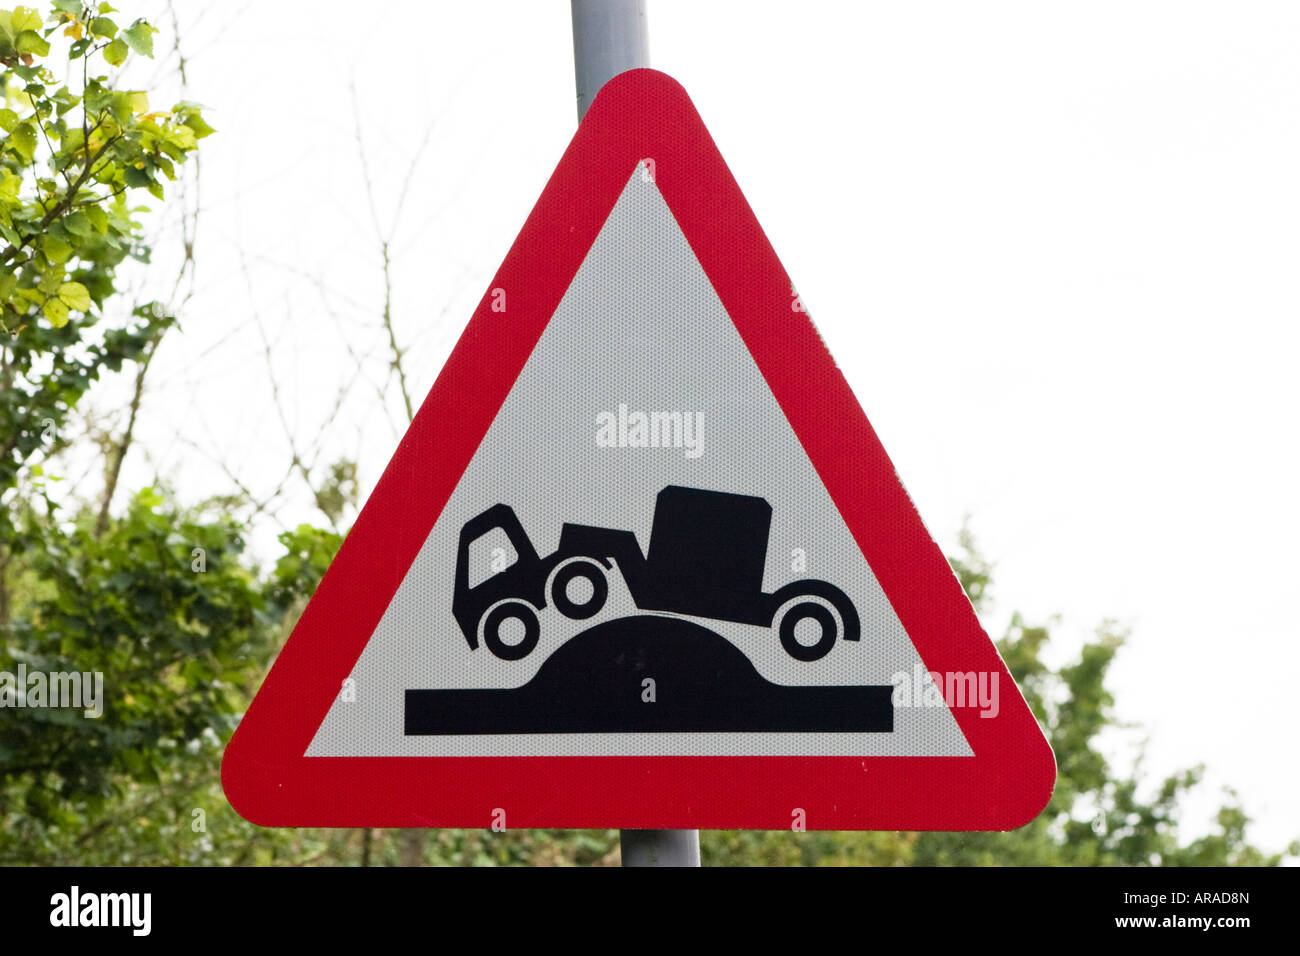 Caution risk of grounding ahead road sign Stock Photo